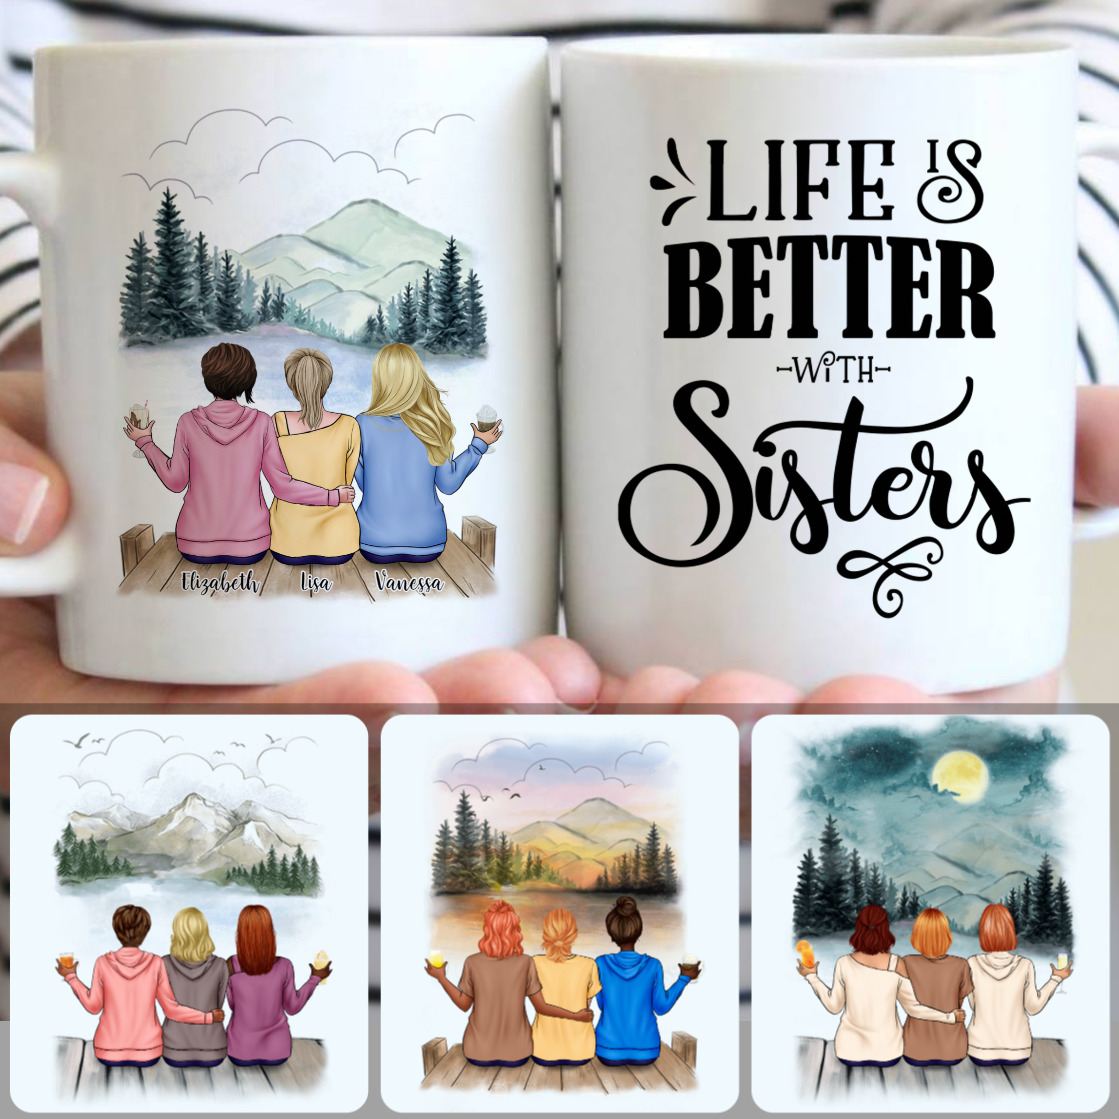 Personalized Mug, Best Birthday Gifts, 3 Sisters Sitting On A Bridge Customized Coffee Mug With Names